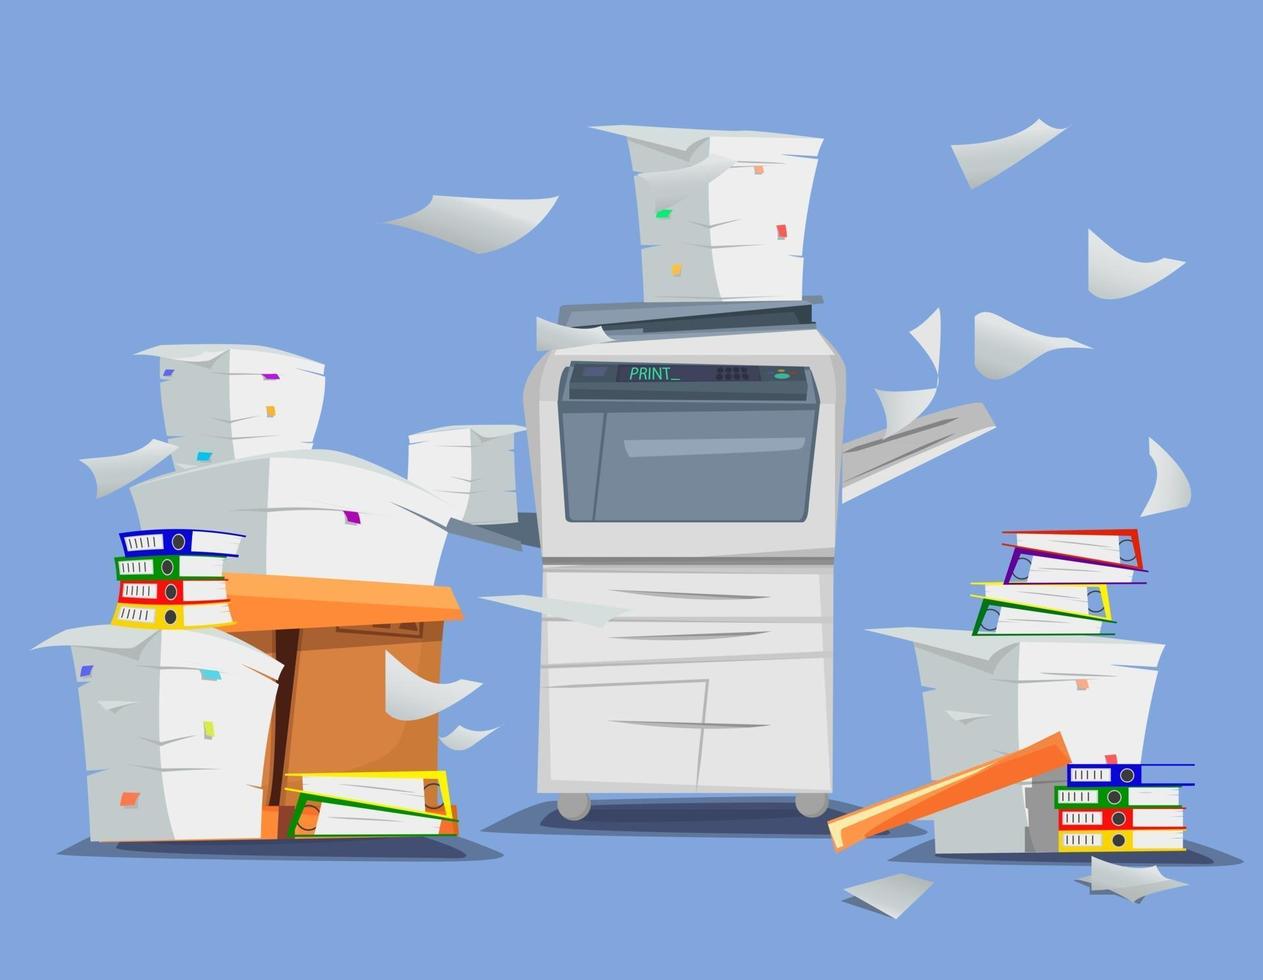 Office multifunction printer scanner Copier with flying paper isolated on background Copy machine with pile of documents stack of papers in cardboard boxes Vector cartoon illustration Flat design